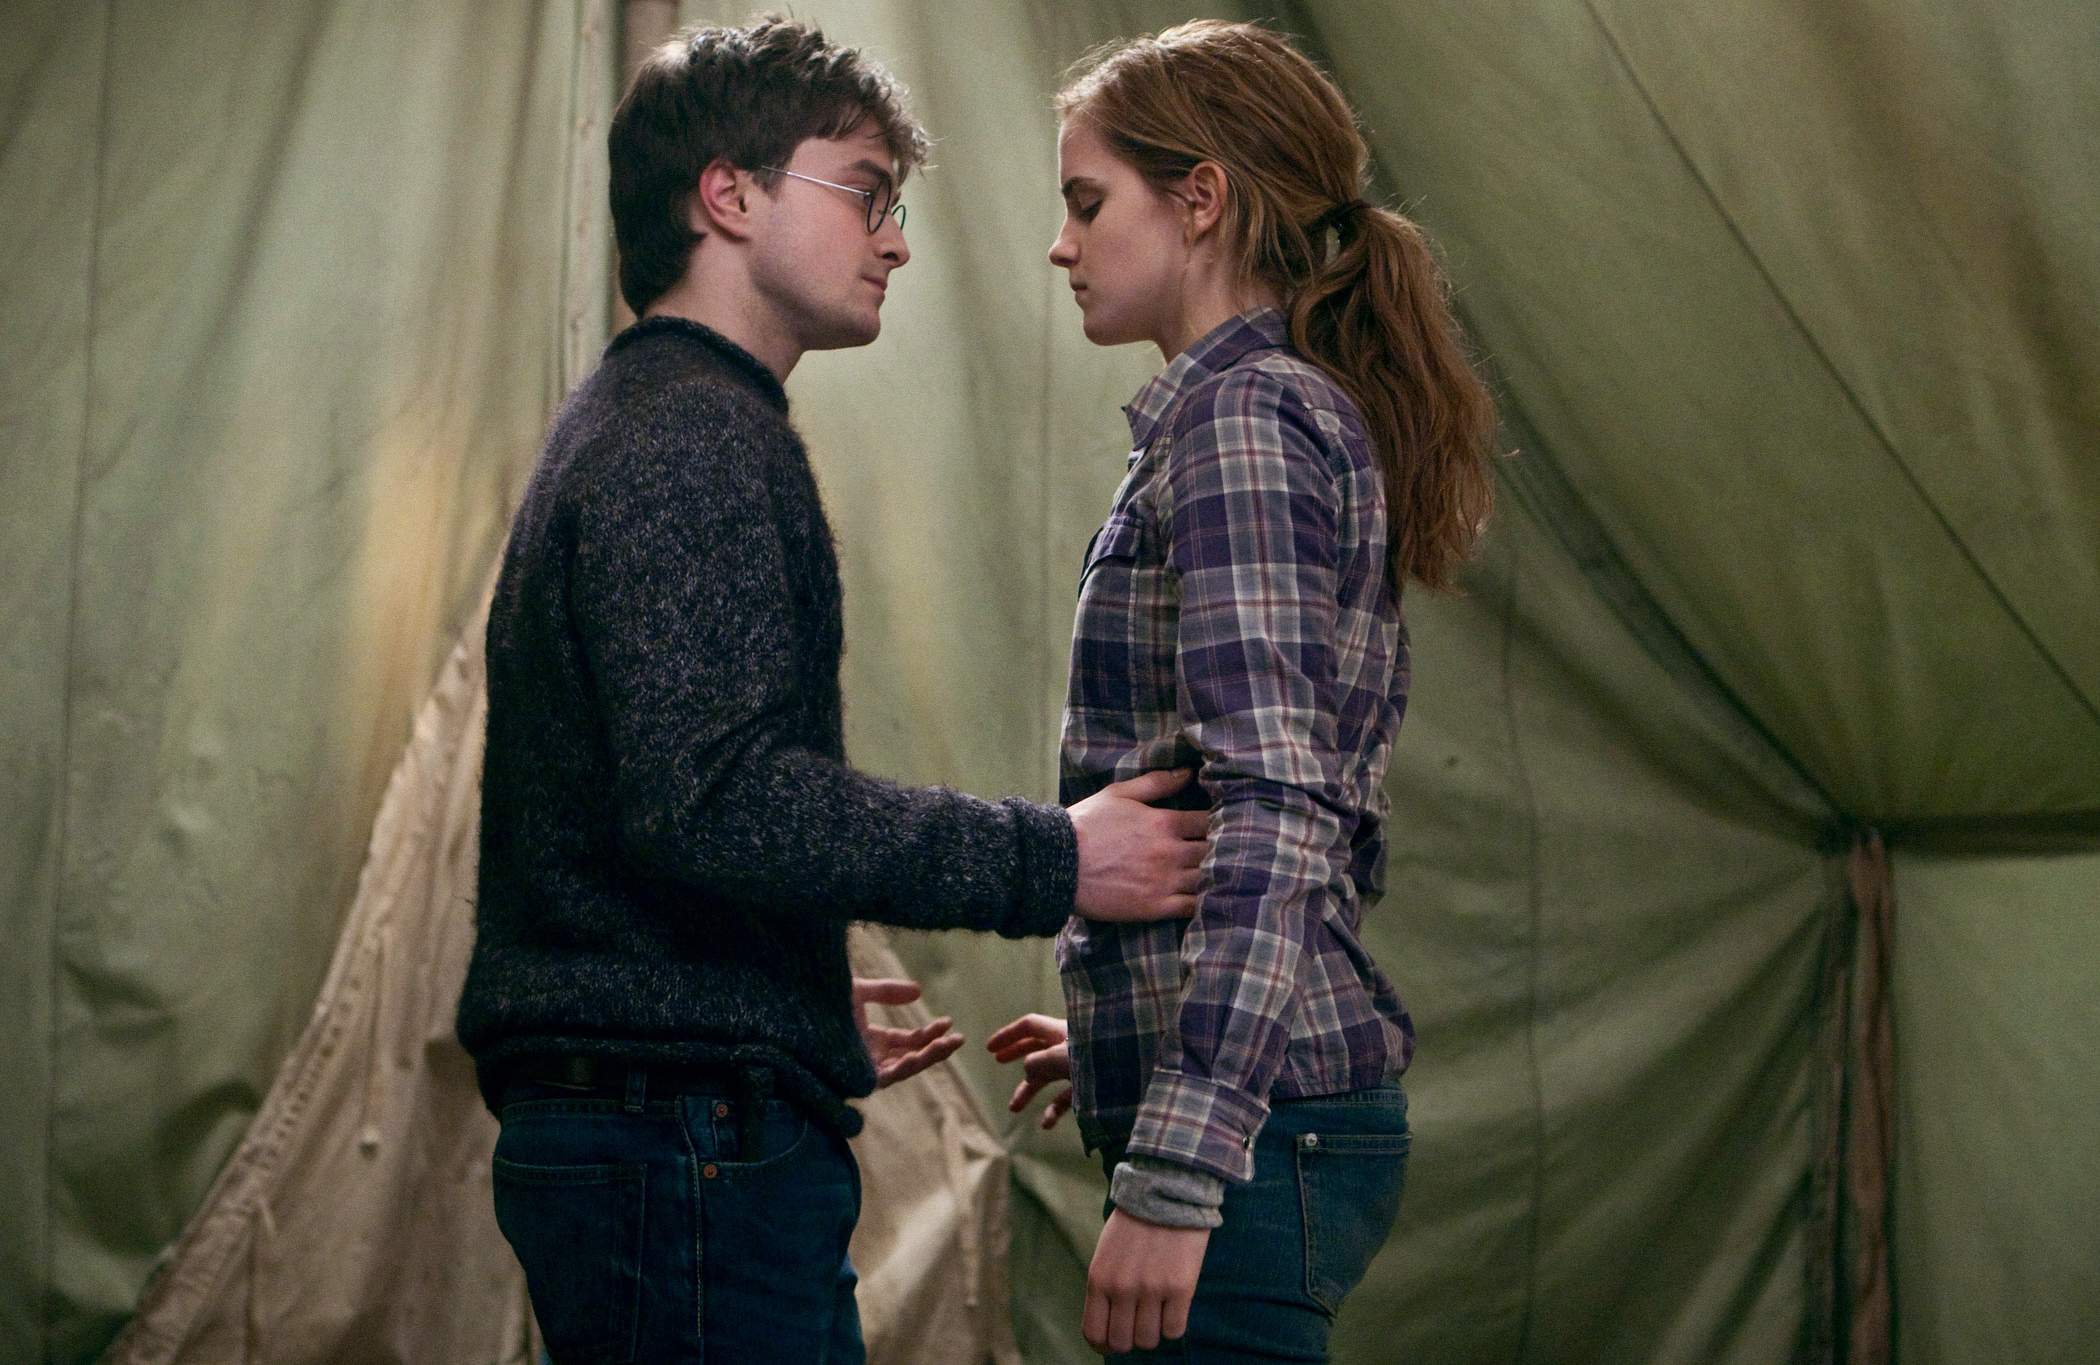 Do you remember that weirdly bizarre tent scene in Part 1 of <em>The Deathly Hallows</em> film? You know -- the one where Harry and Hermione are slow dancing with one another in what was a strangely intimate and borderline erotic scene? Well, that was never written in the original novels to begin with. As we learned over 10 years after filming, Emma Watson wasn't exactly comfortable with it, either. <br> <br> Watson was reportedly a loyalist to the novels and resonated with the character portrayal created by J.K. Rowling. When this scene was added to the script, there was real apprehension about overdoing it. Watson allegedly didn't want to exacerbate subtle innuendo which could've emanated from the scene itself. She reportedly voiced this concern to the producers of the film during shooting.